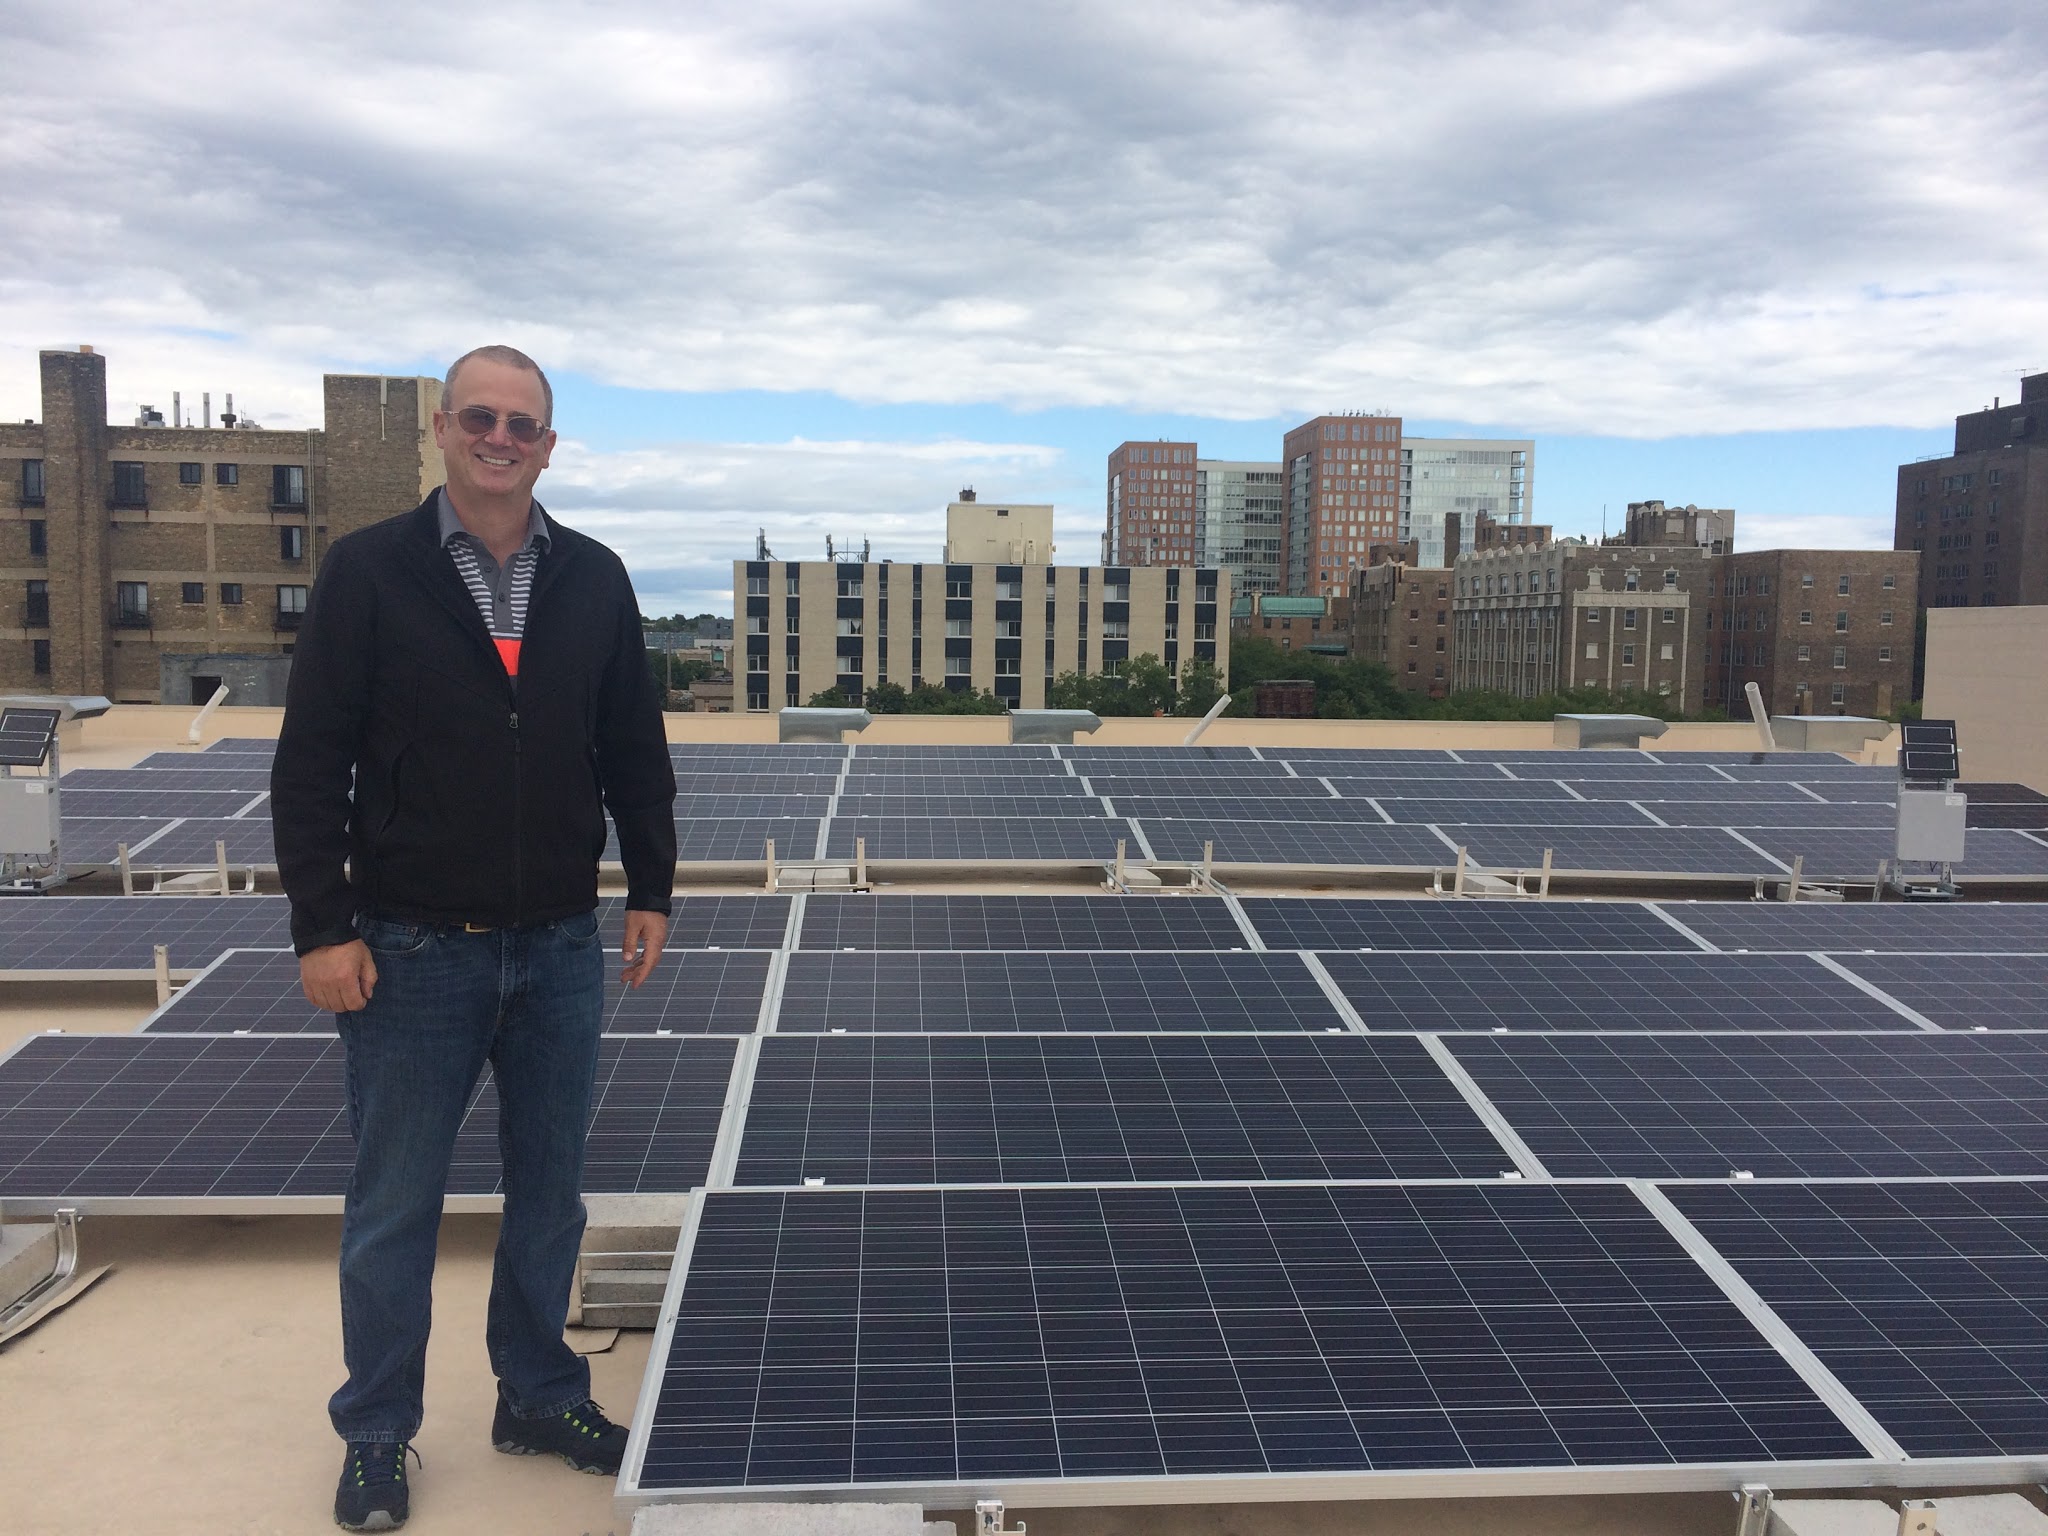 Mike O'Connor stands next to solar panels